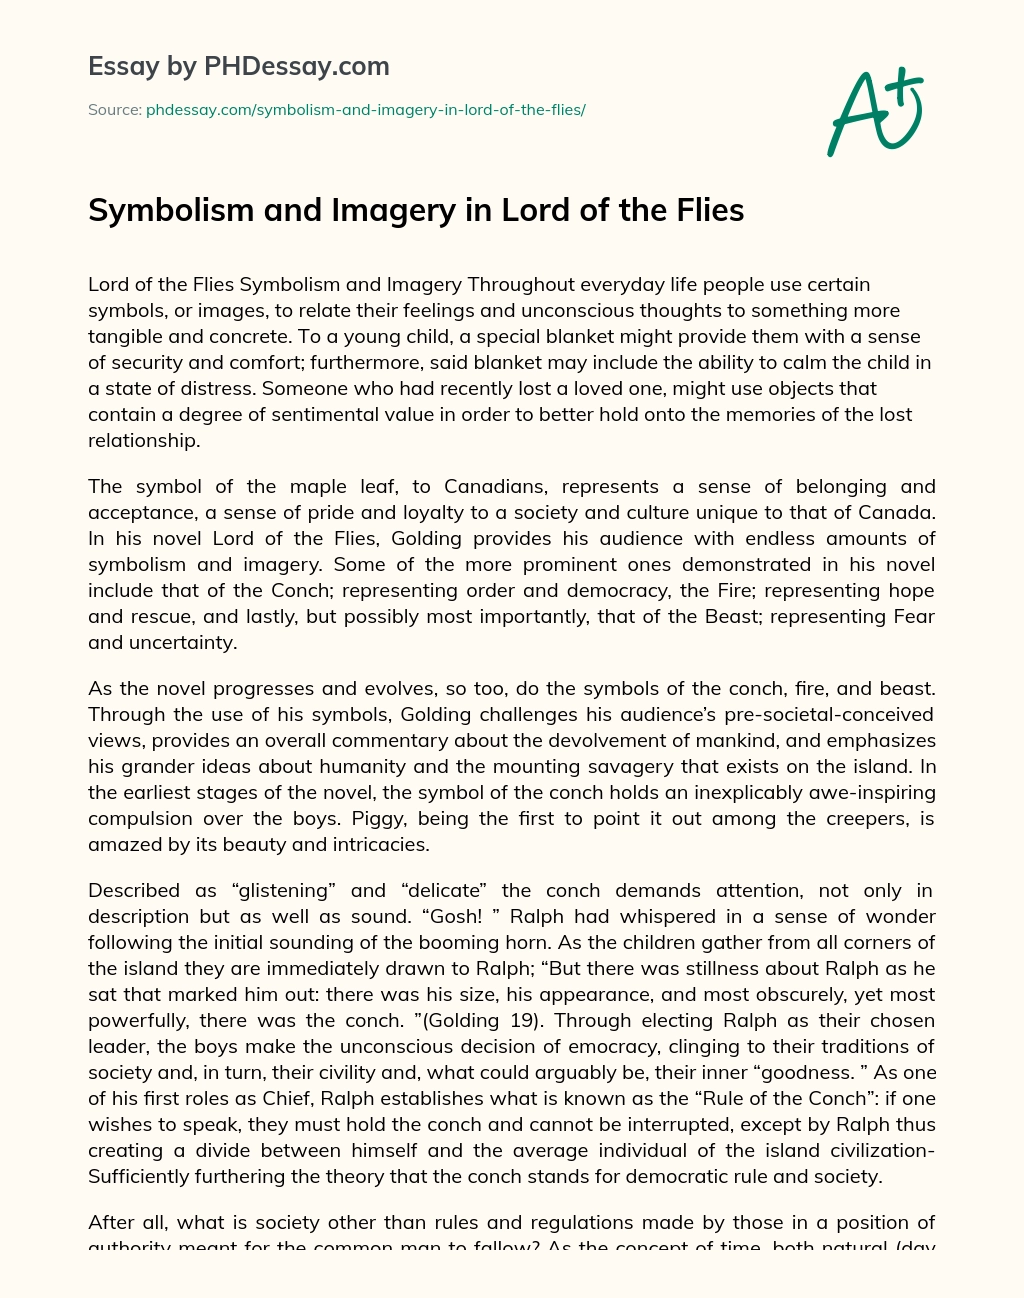 Symbolism and Imagery in Lord of the Flies essay